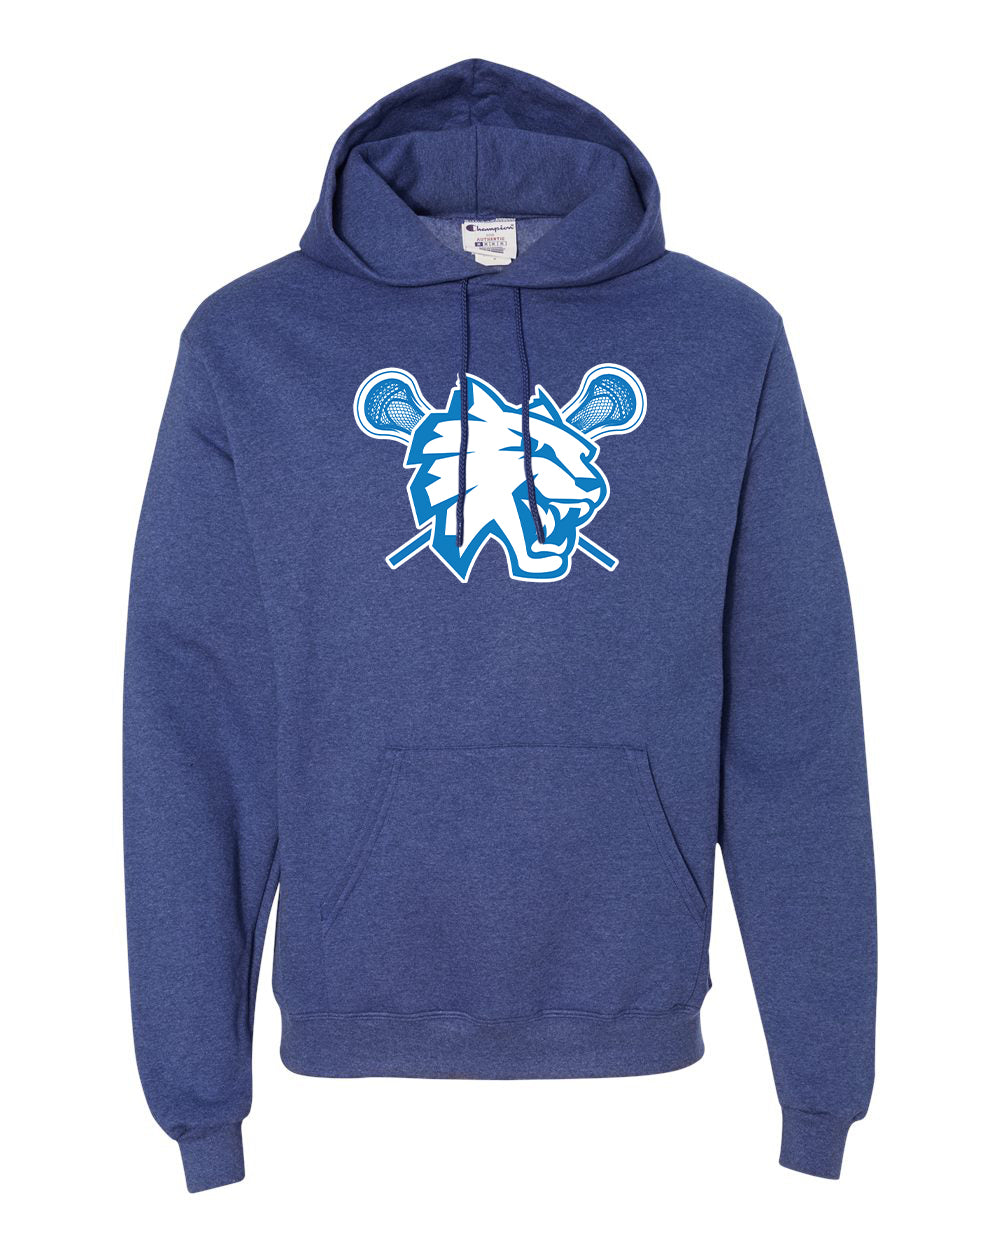 Suffield Youth Lacrosse - Adult Champion Hoodie "Cat" - S700 (color options available)